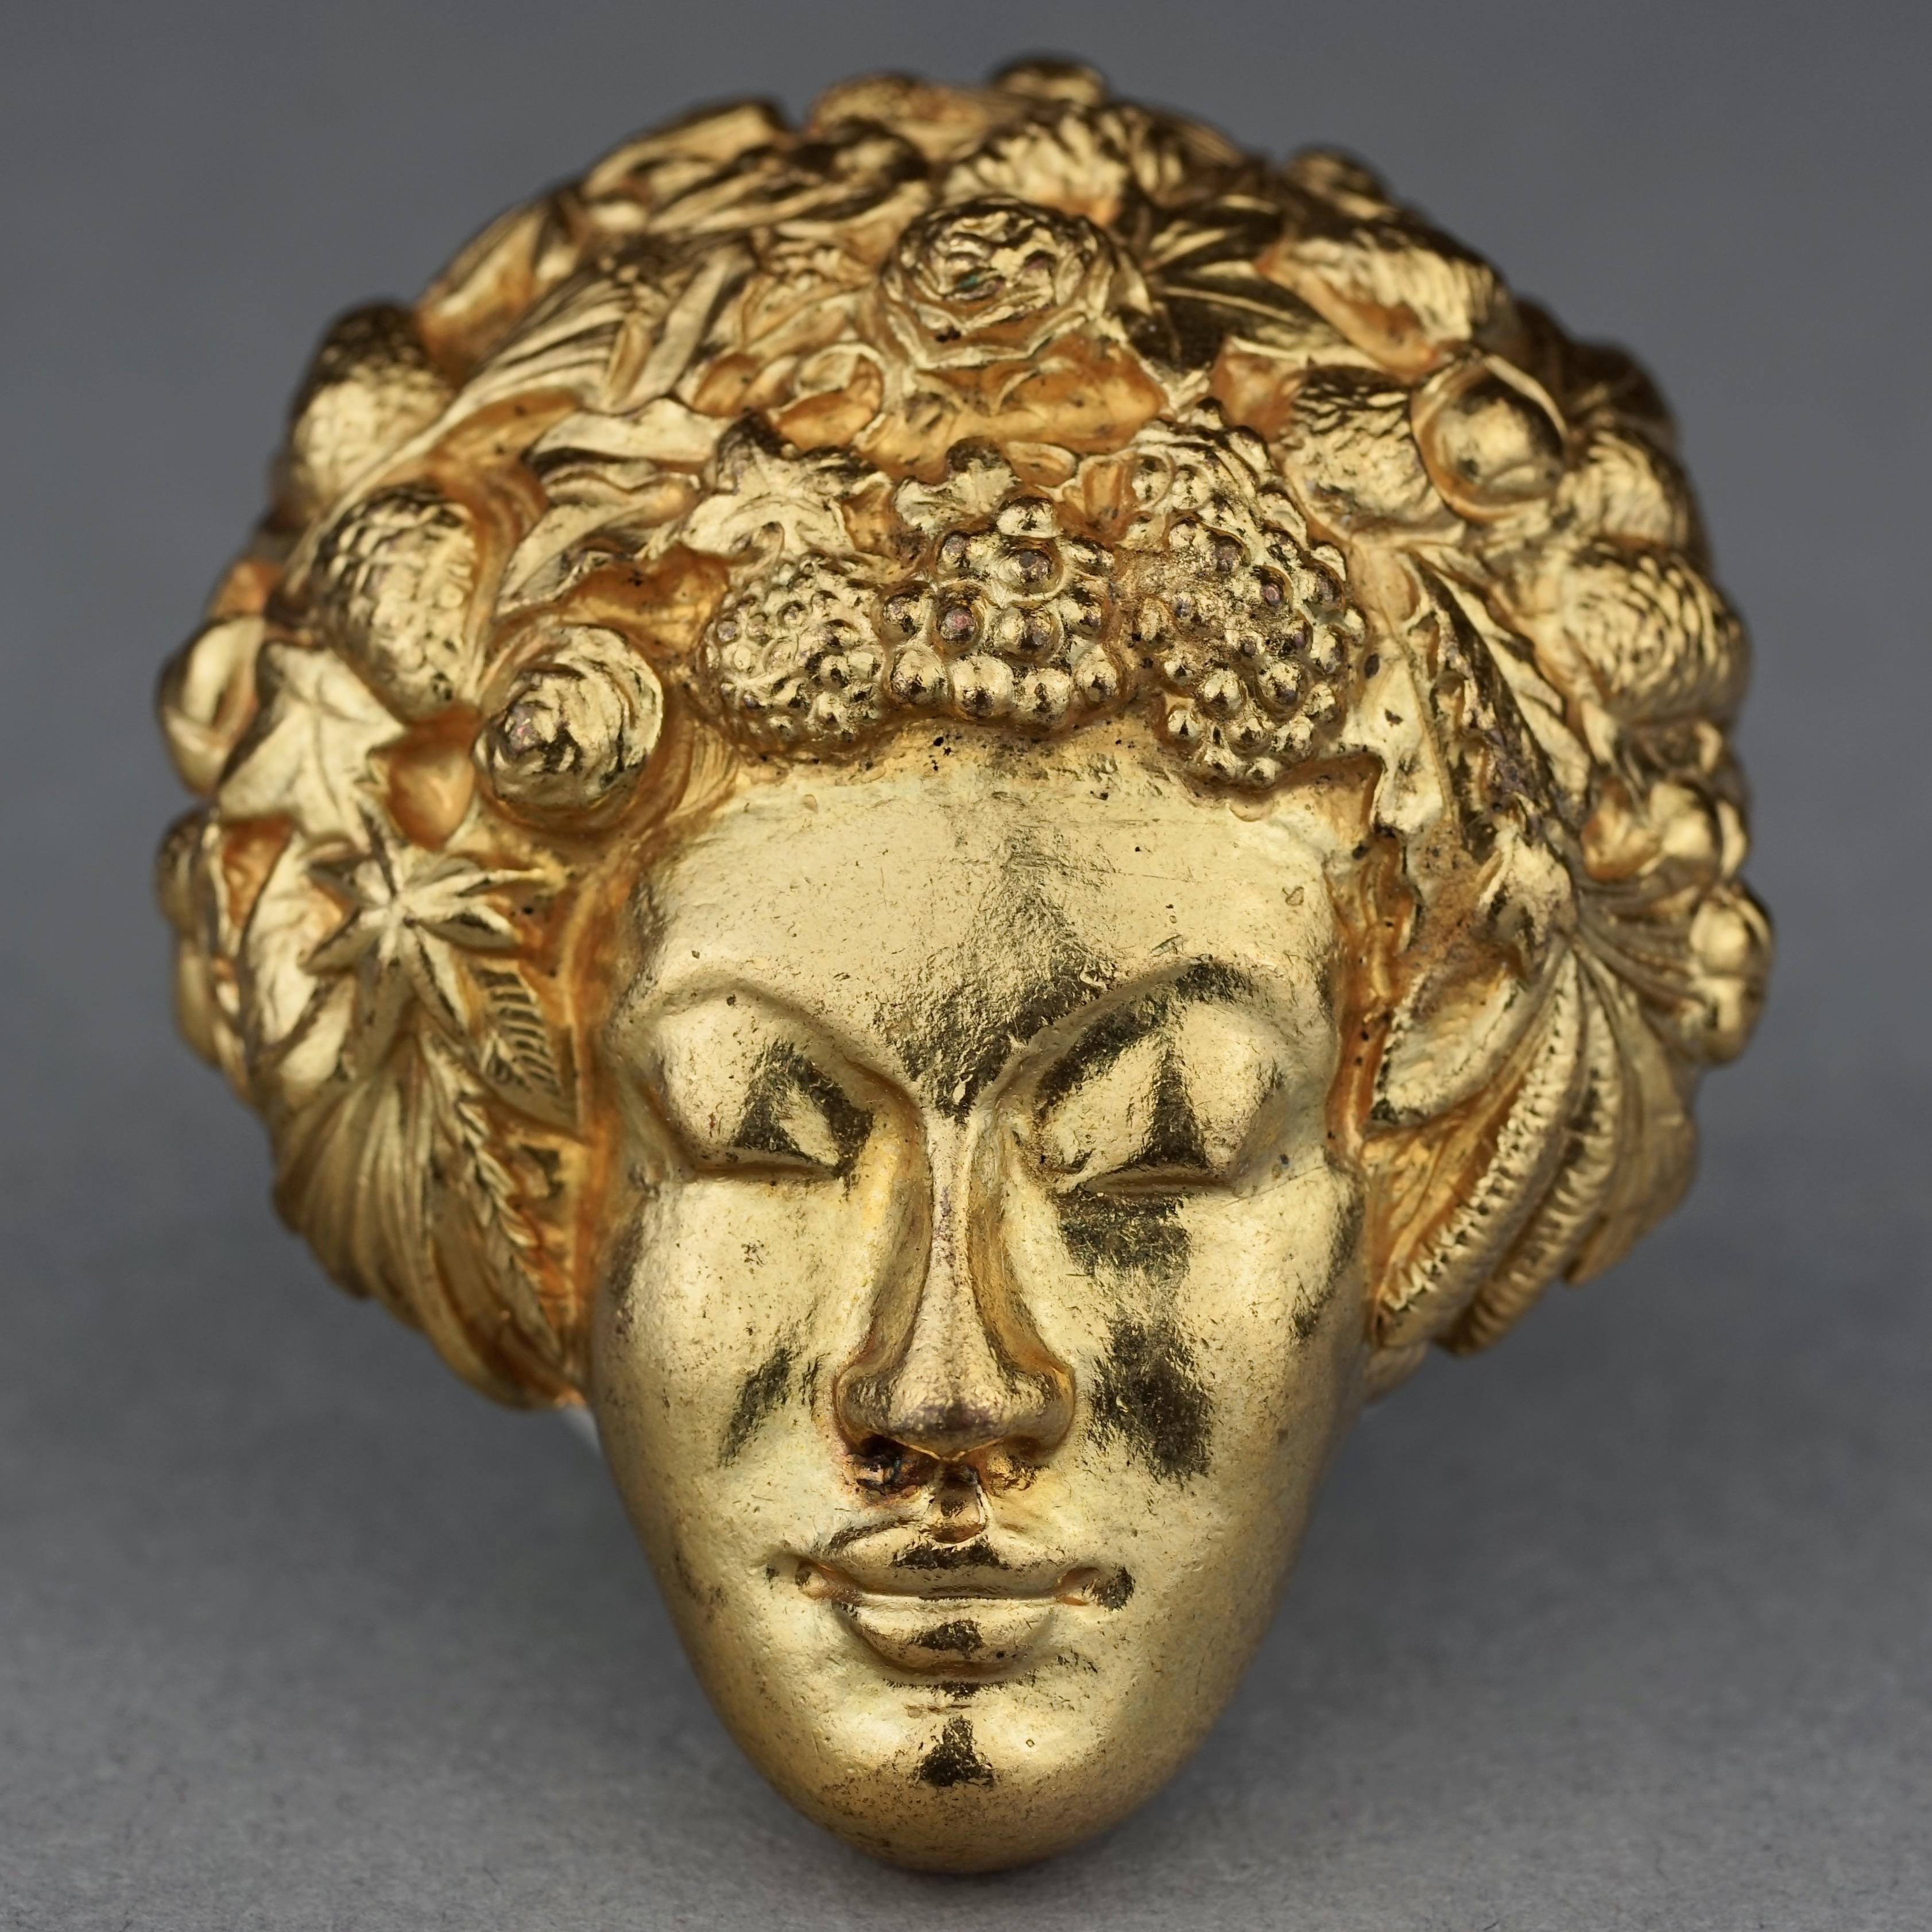 Vintage ISABEL CANOVAS Intricate Lady Face Brooch 

Measurements:
Height: 2.16 inches (5.5 cm)
Width: 1.77 inches (4.5 cm)

Features:
- 100% Authentic ISABEL CANOVAS.
- 3 dimensional sculpted face with novelty hair.
- Gold tone.
- Signed ISABEL